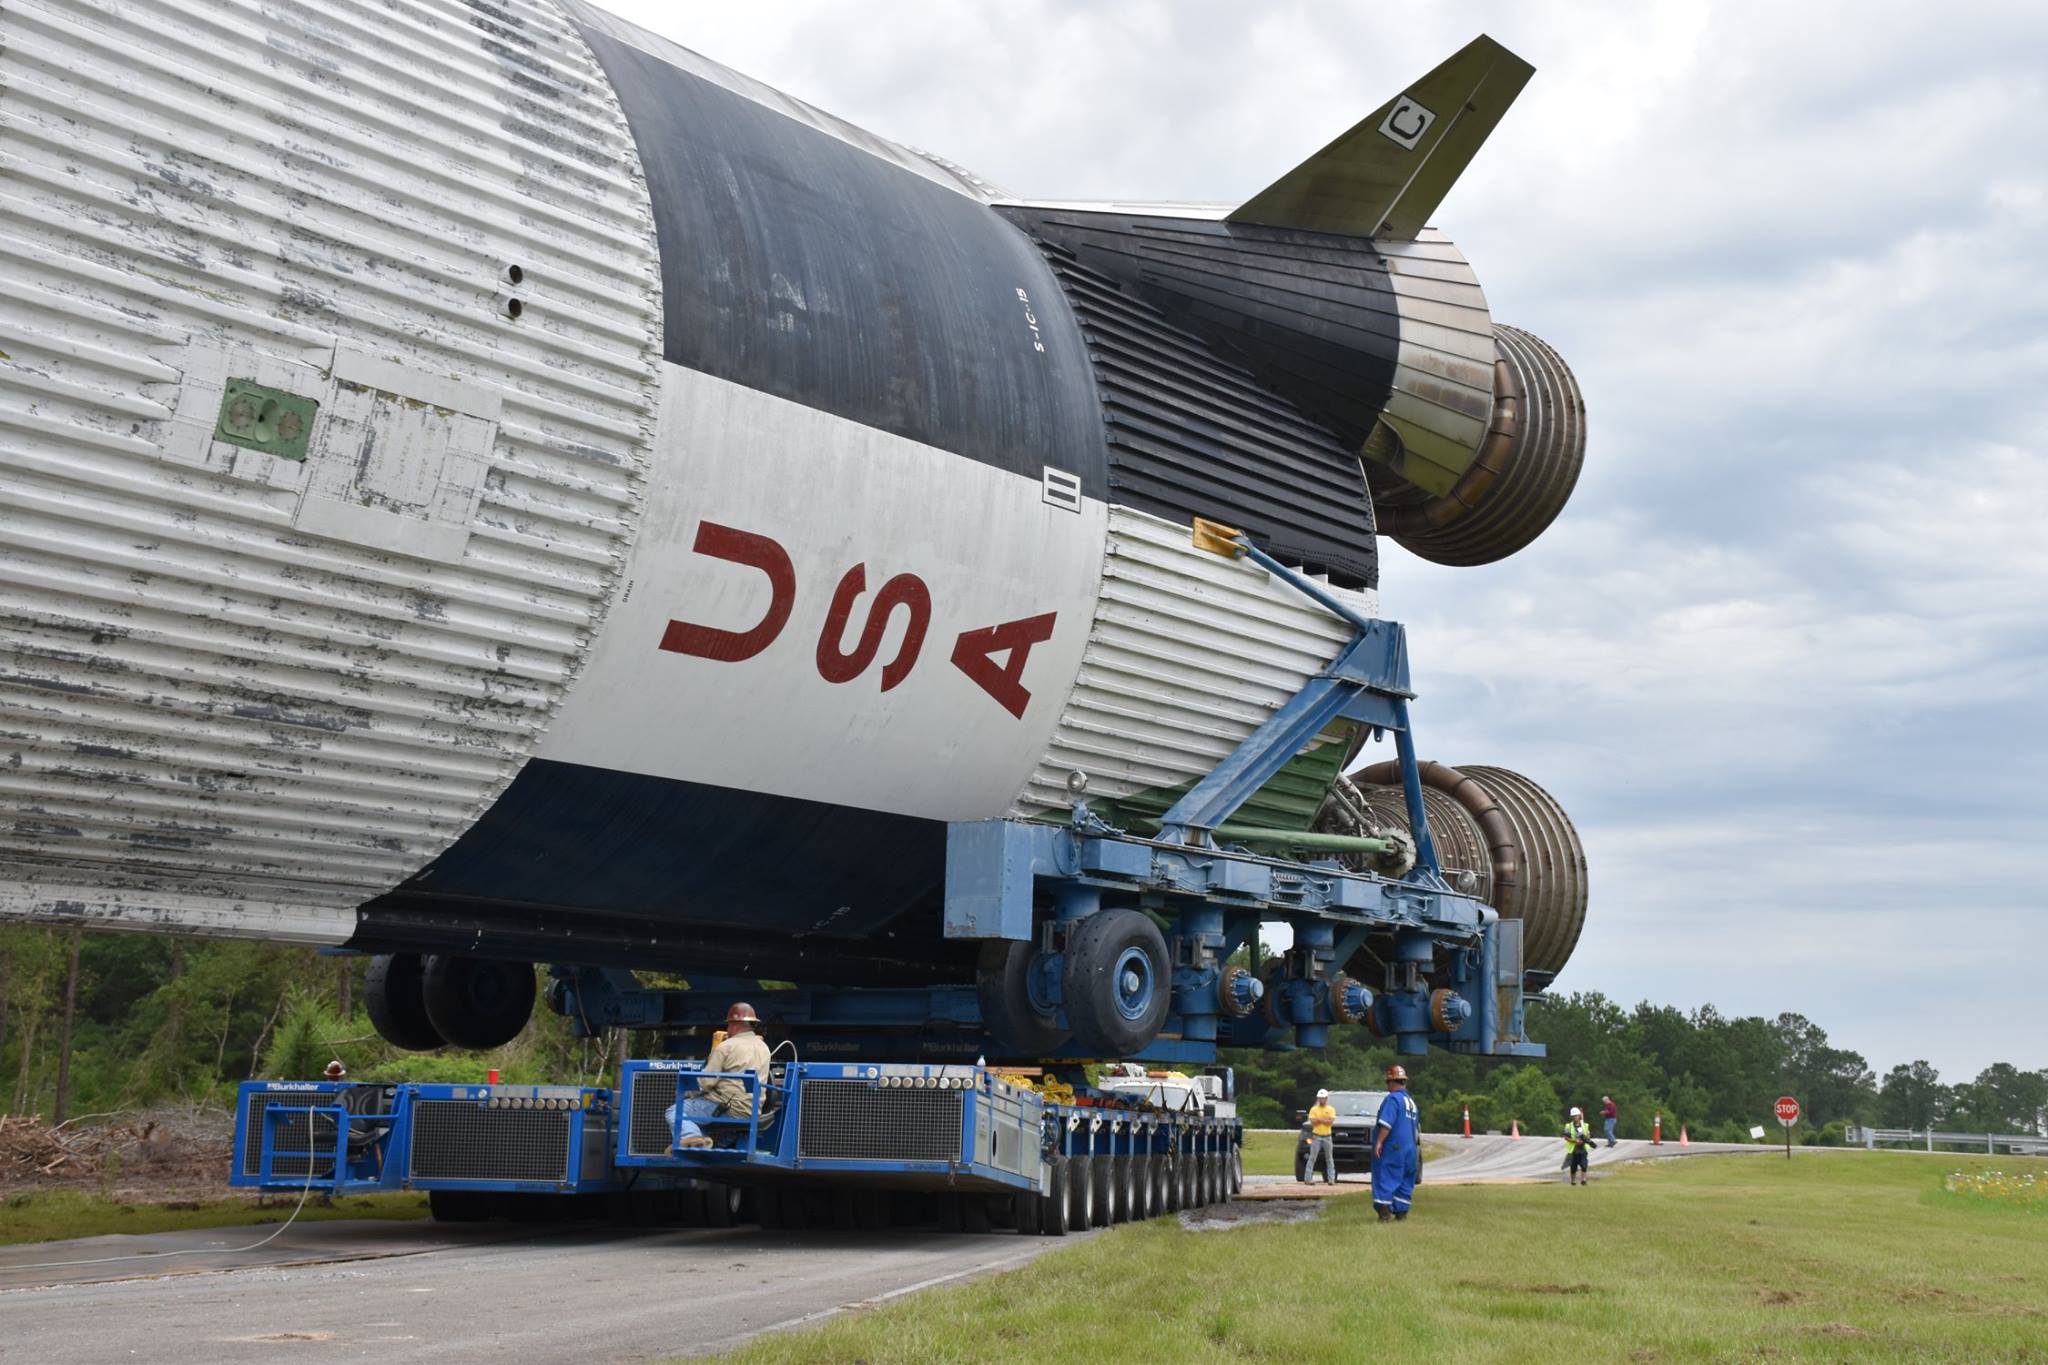 NASA’s Last Apollo Saturn V Rocket Is On Its Way To Mississippi Instead Of The Moon